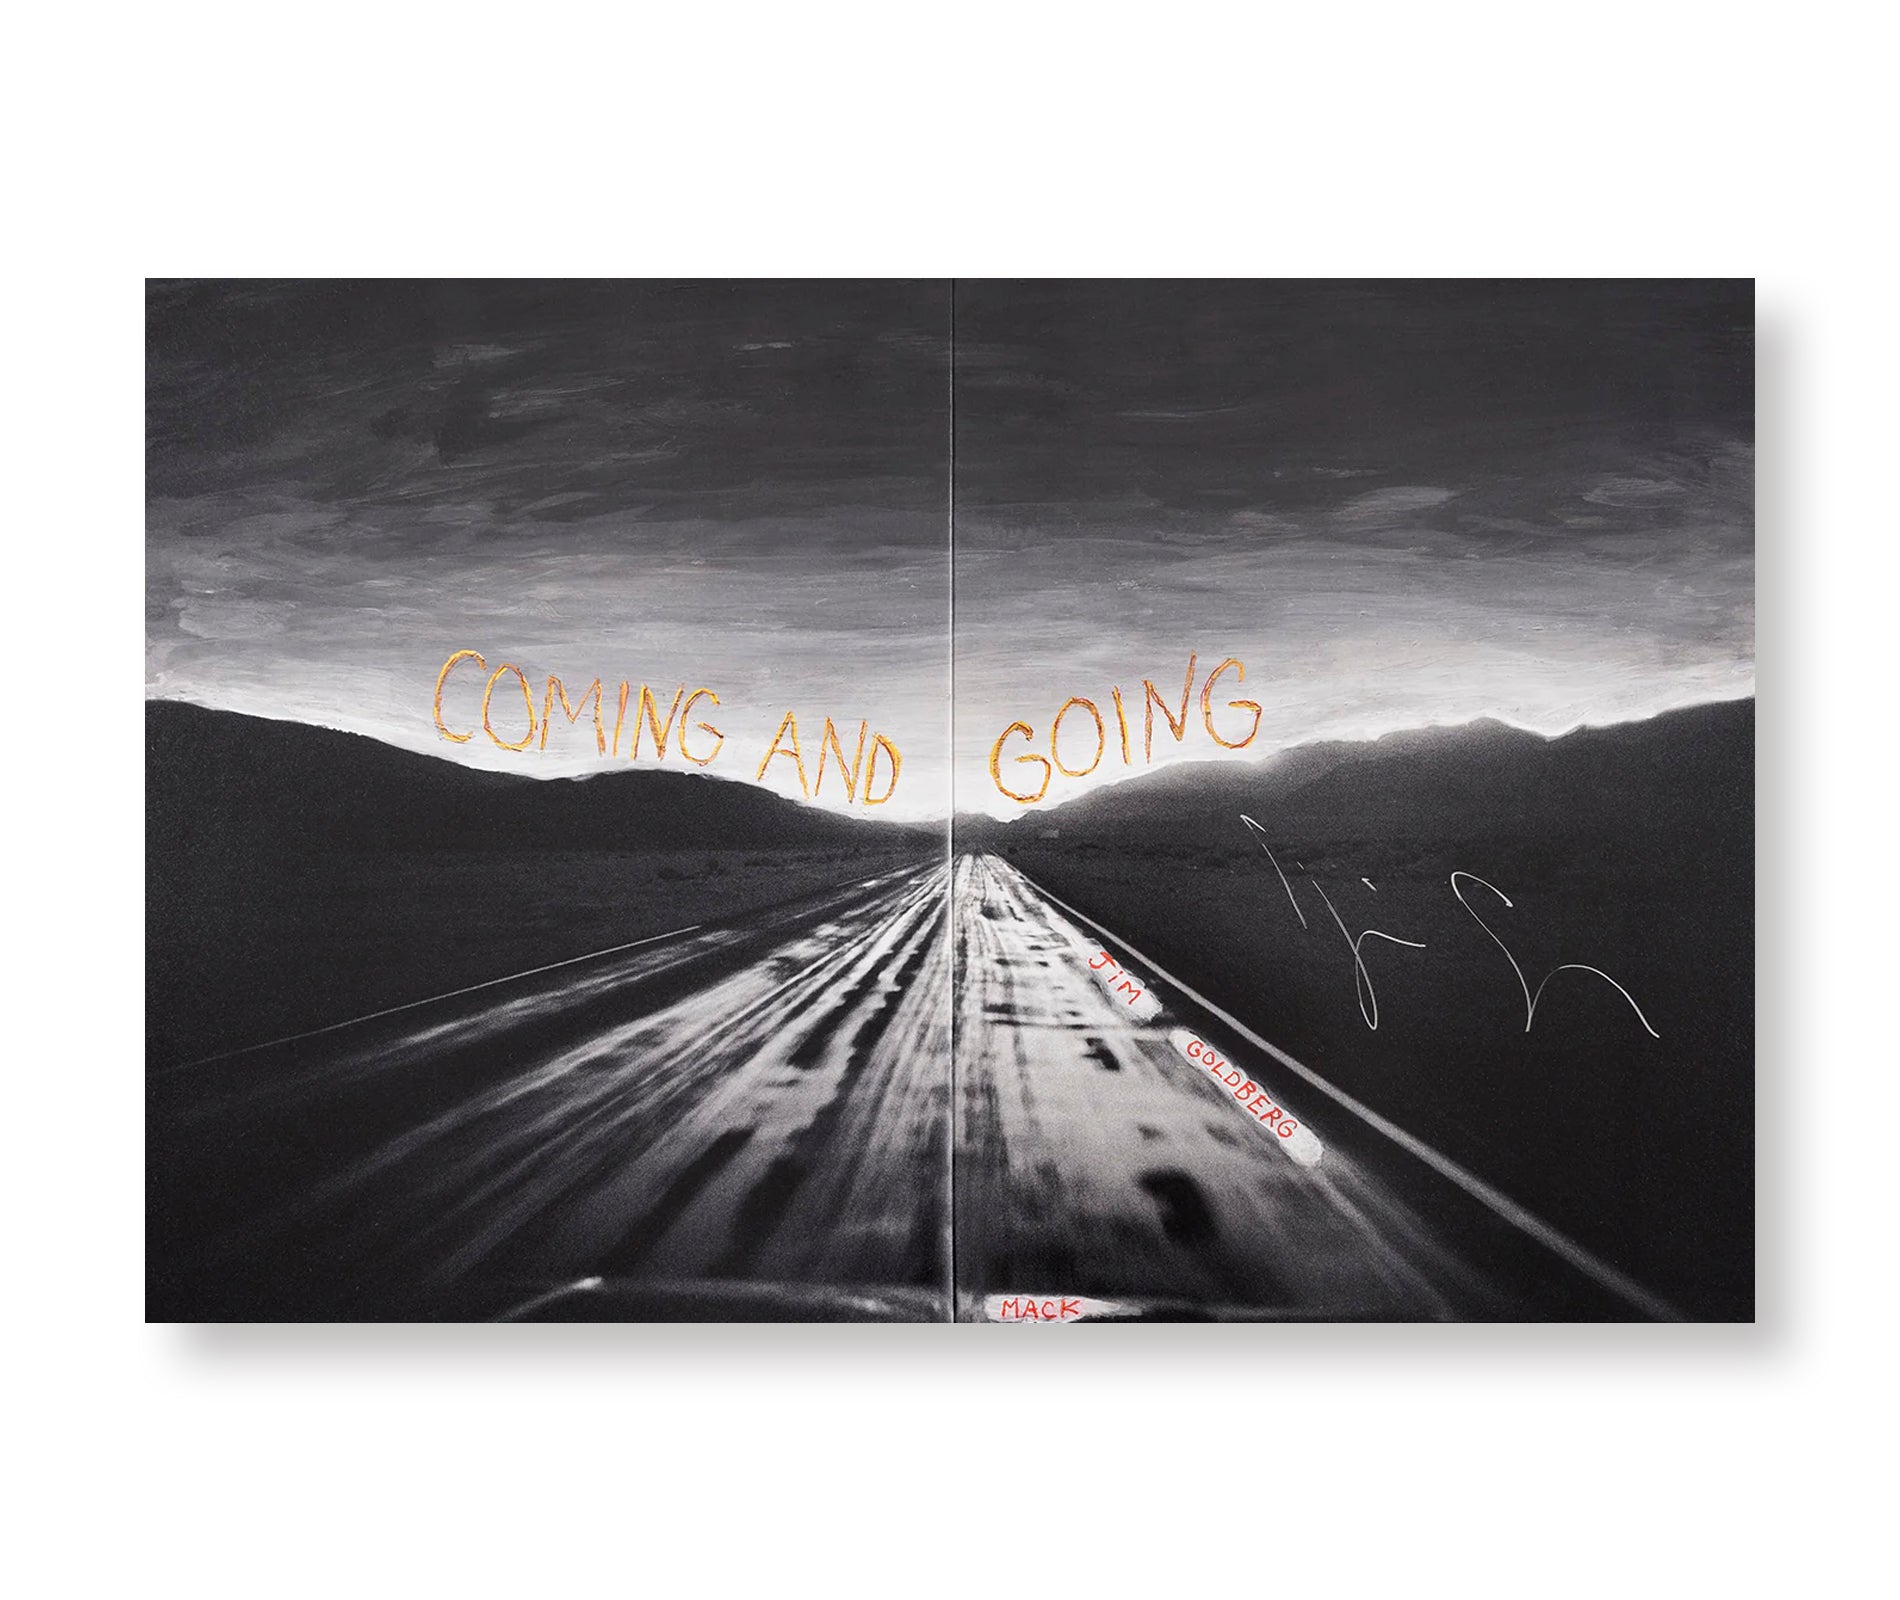 COMING AND GOING by Jim Goldberg [SIGNED]